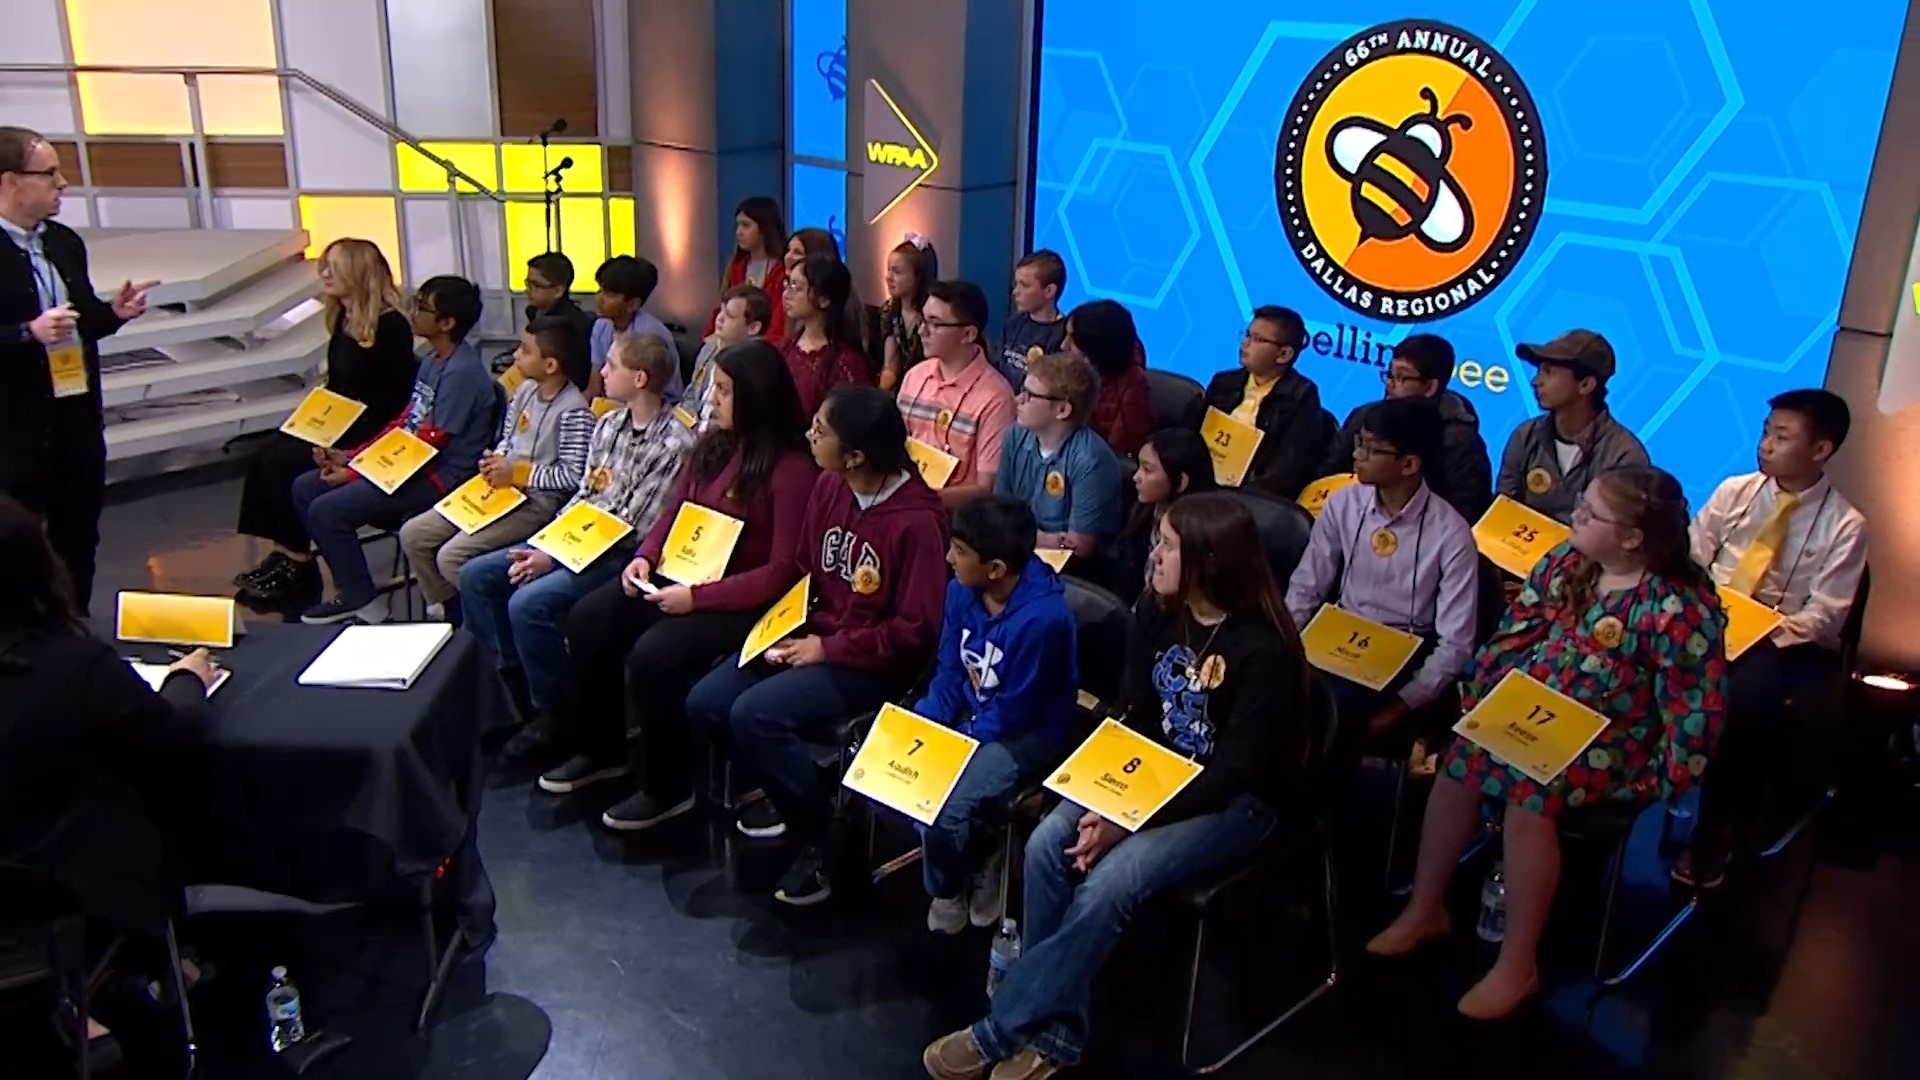 Students from northern and eastern Texas competed at the 66th Annual Dallas Regional Spelling Bee for their chance to advance to the Scripps National Spelling Bee.